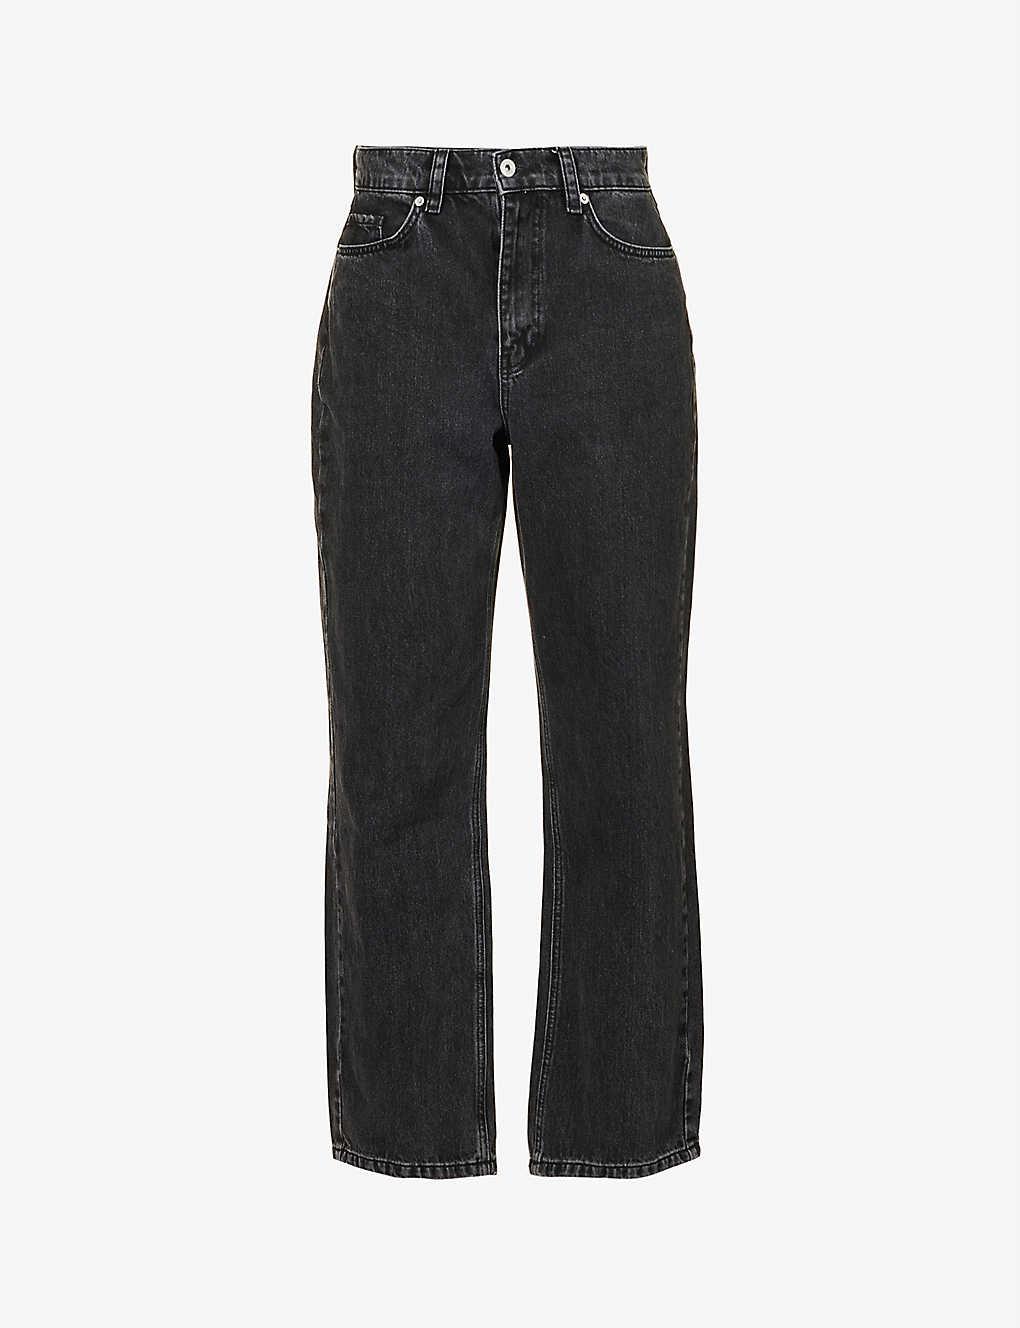 Axel Arigato Sly Low-rise Brand-patch Jeans in Black | Lyst UK